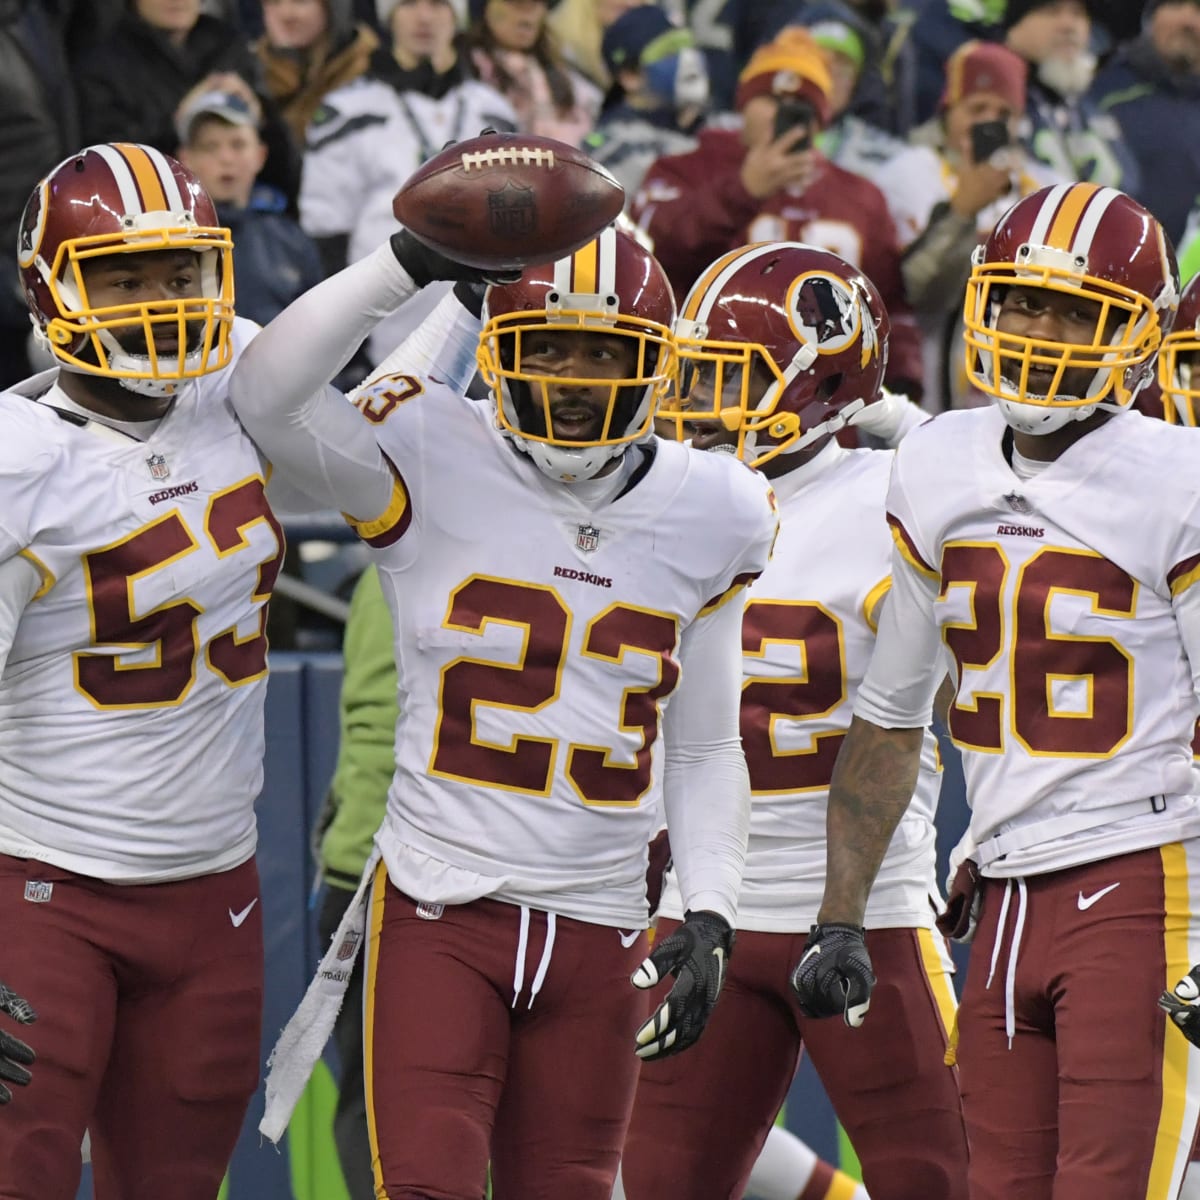 DeAngelo Hall Doubles Down! - Sports Illustrated Washington